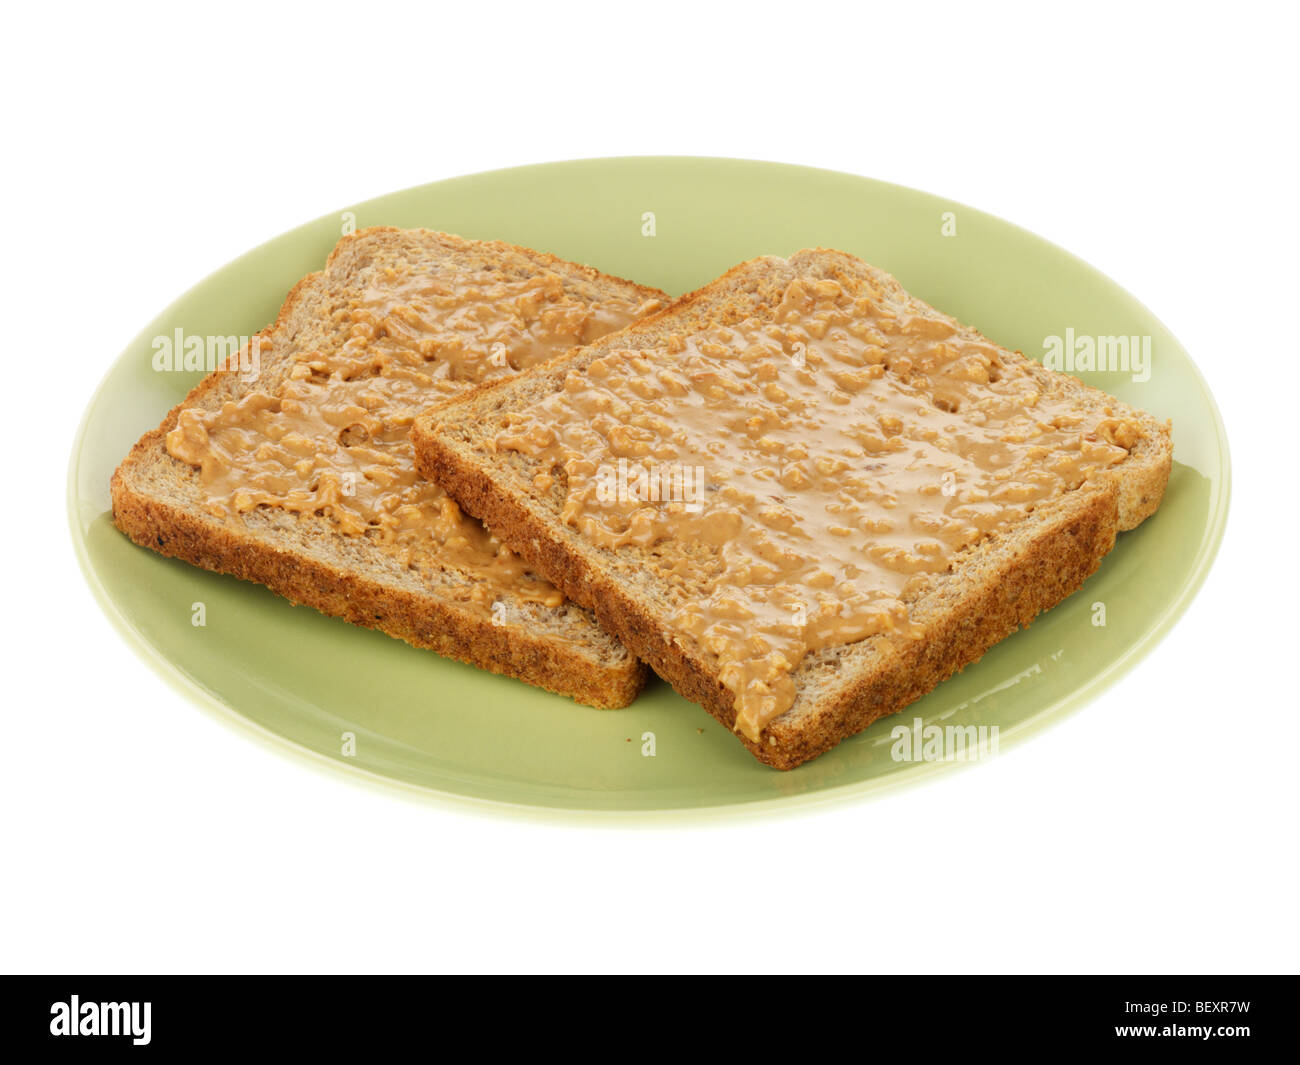 Wholemeal Toast with Peanut Butter Stock Photo